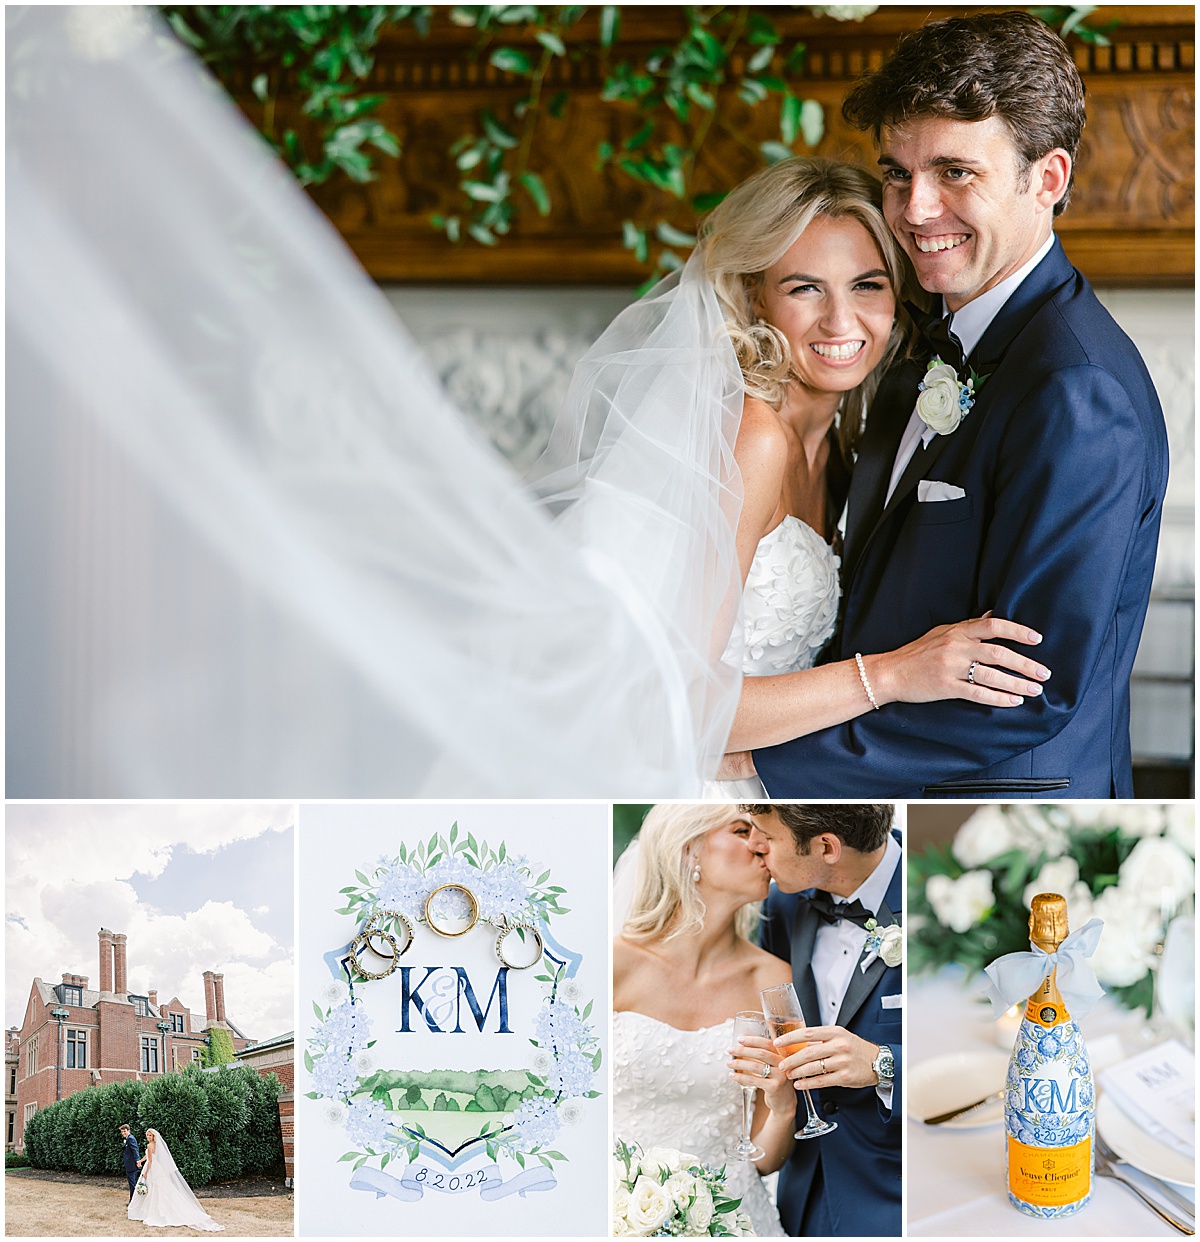 Natirar wedding in hydrangea blue with classic bride and groom and hydrangea inspired wedding details